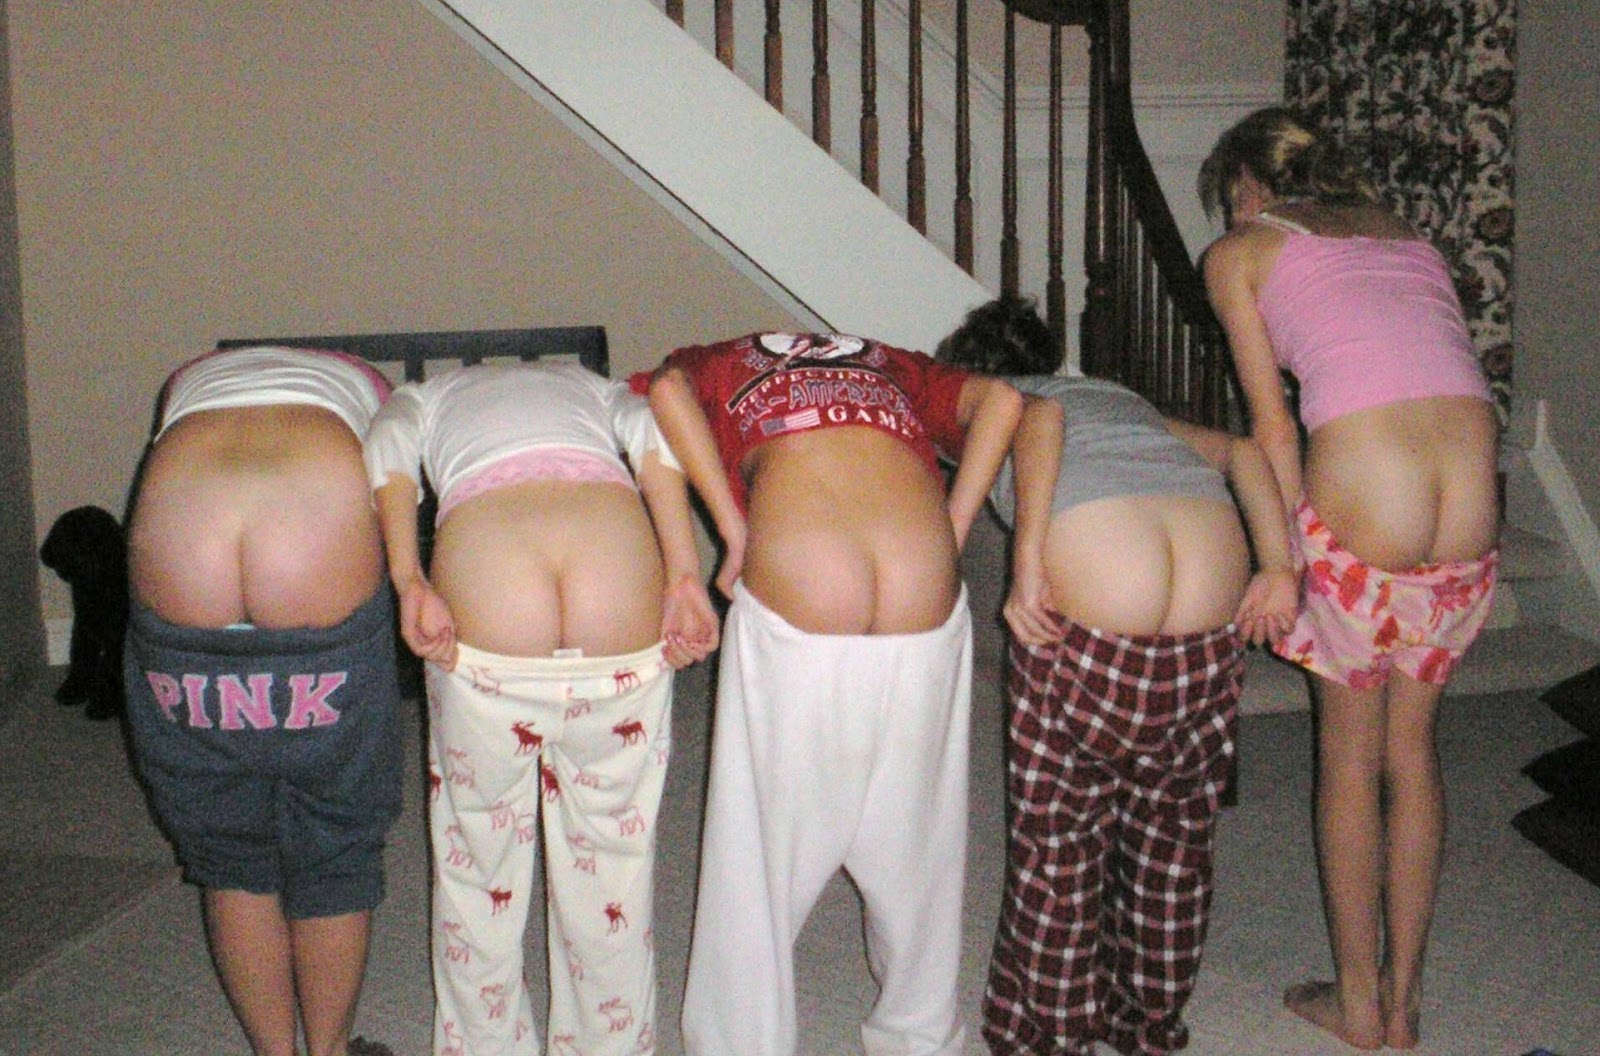 Girls mooning their naked butt - Hot Nude